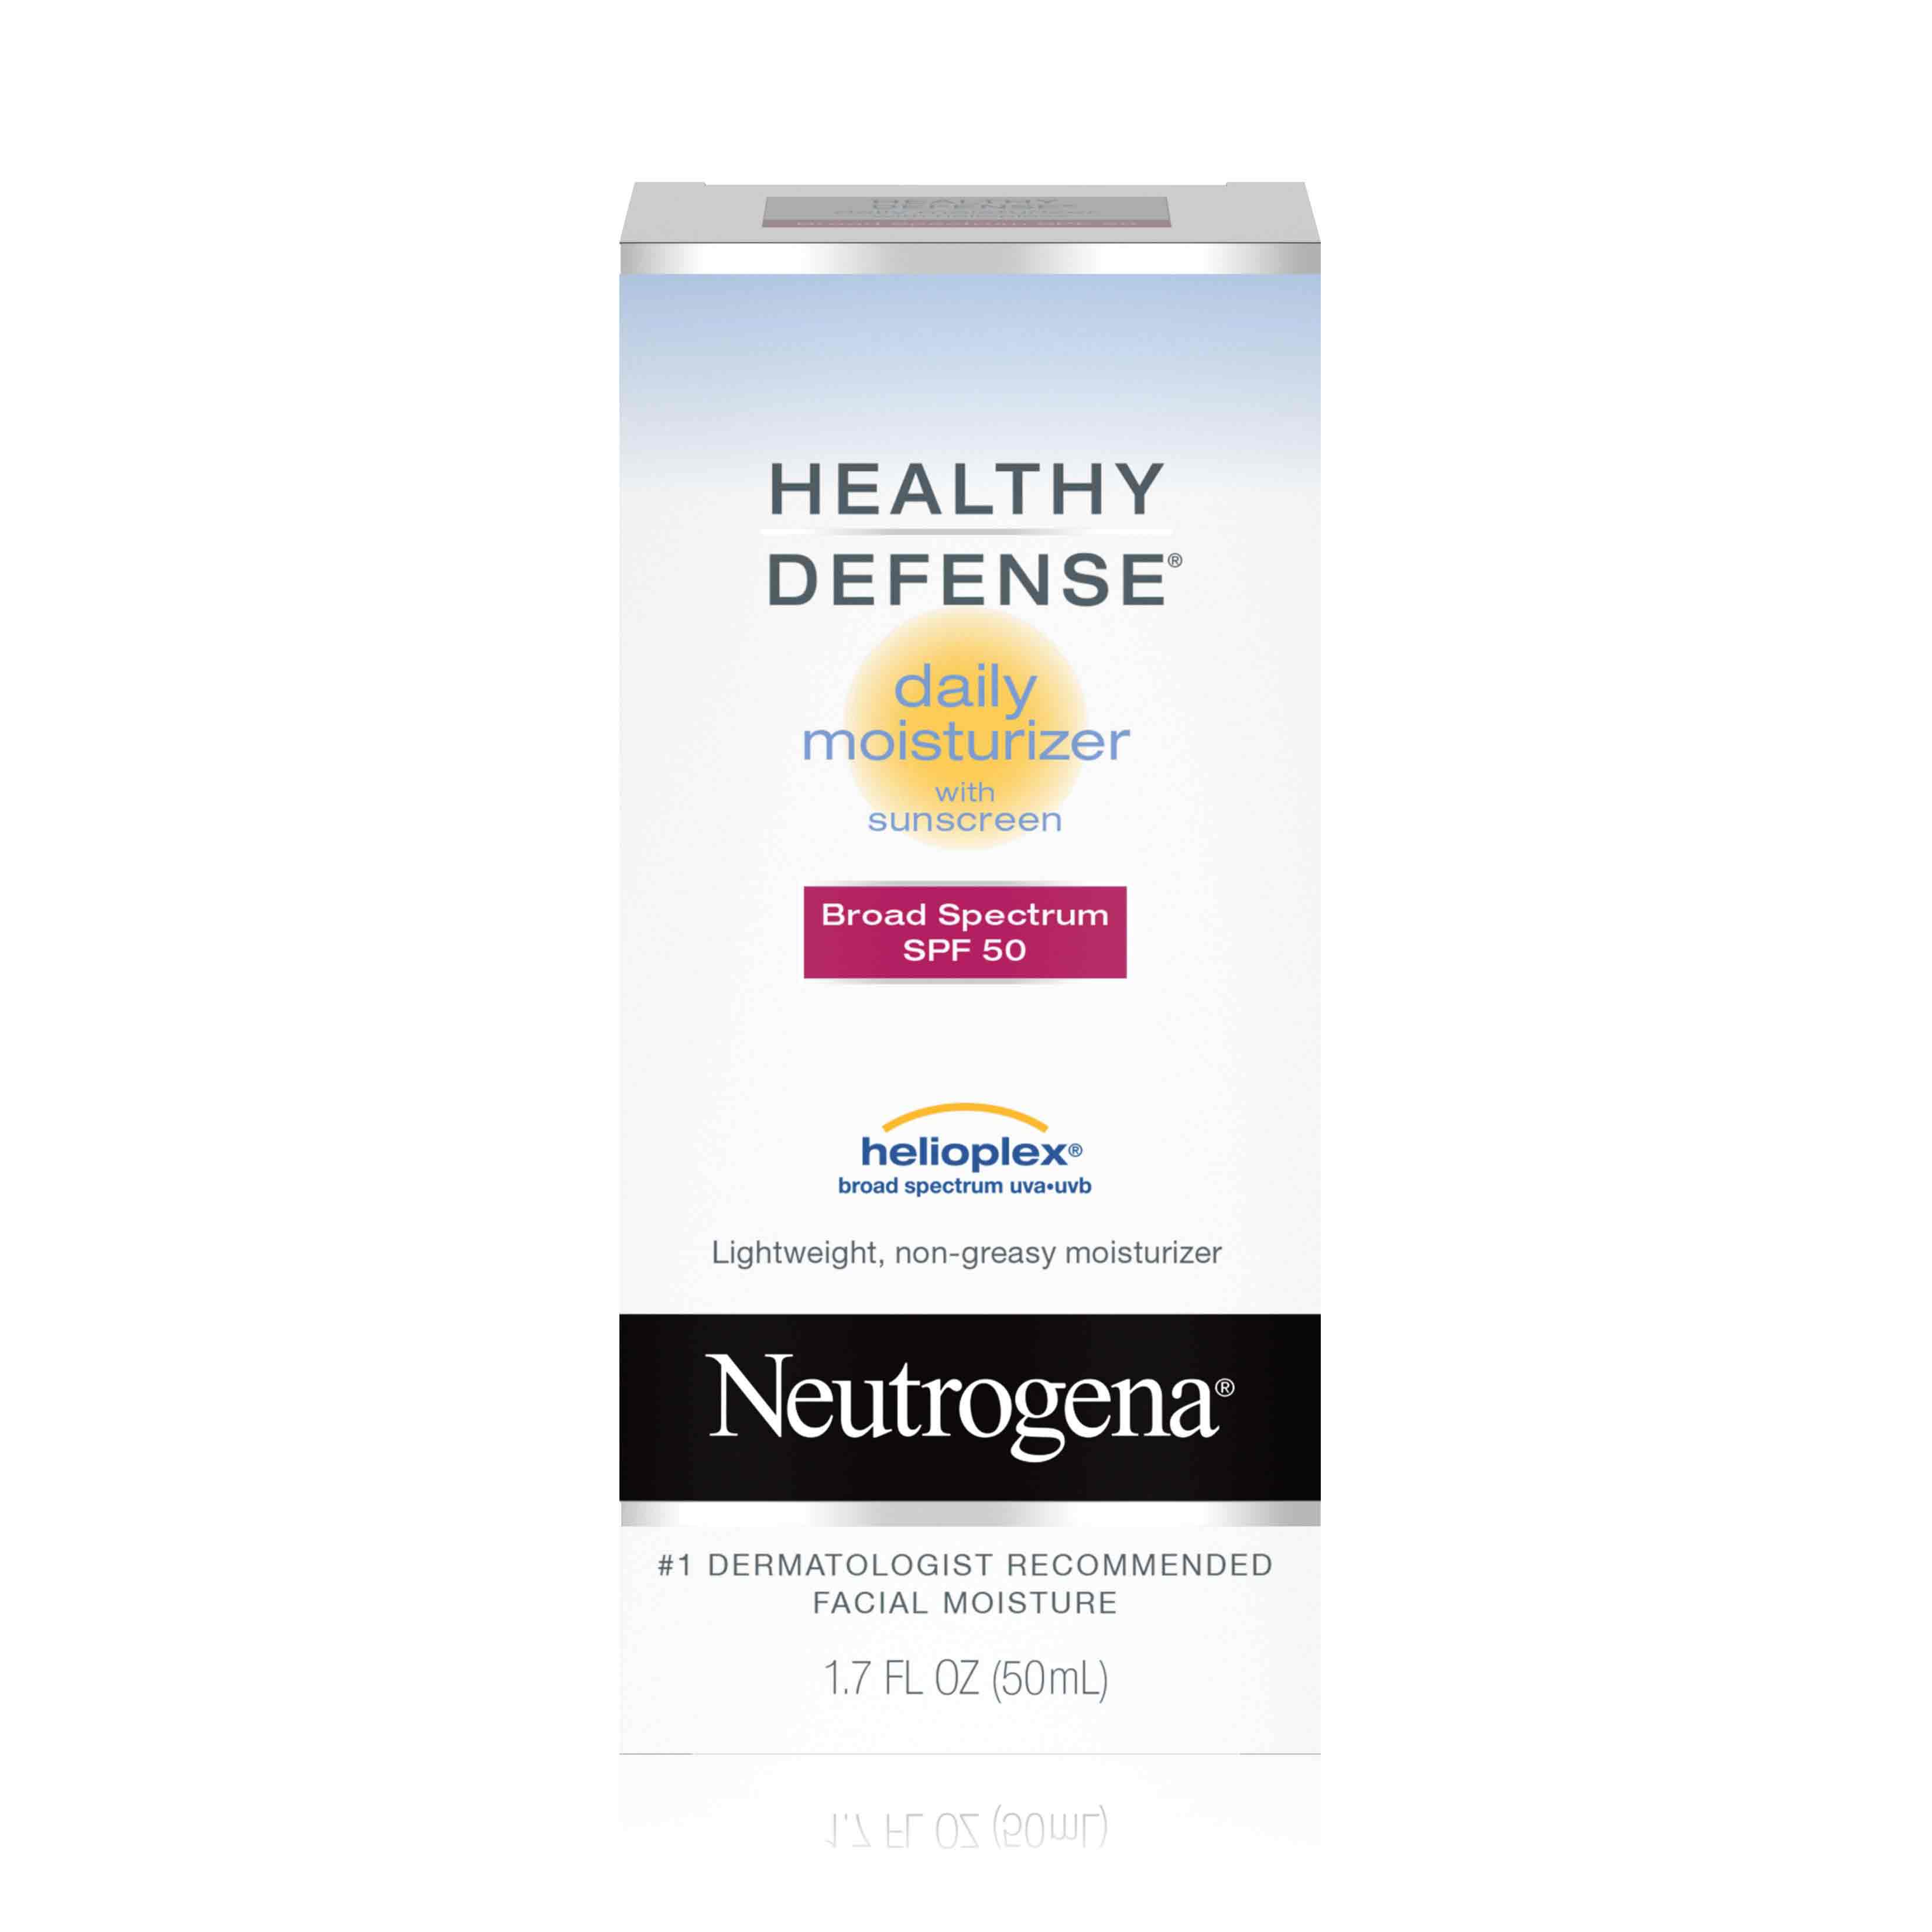 Healthy Defense® Daily Moisturizer with Sunscreen Broad Spectrum SPF 50